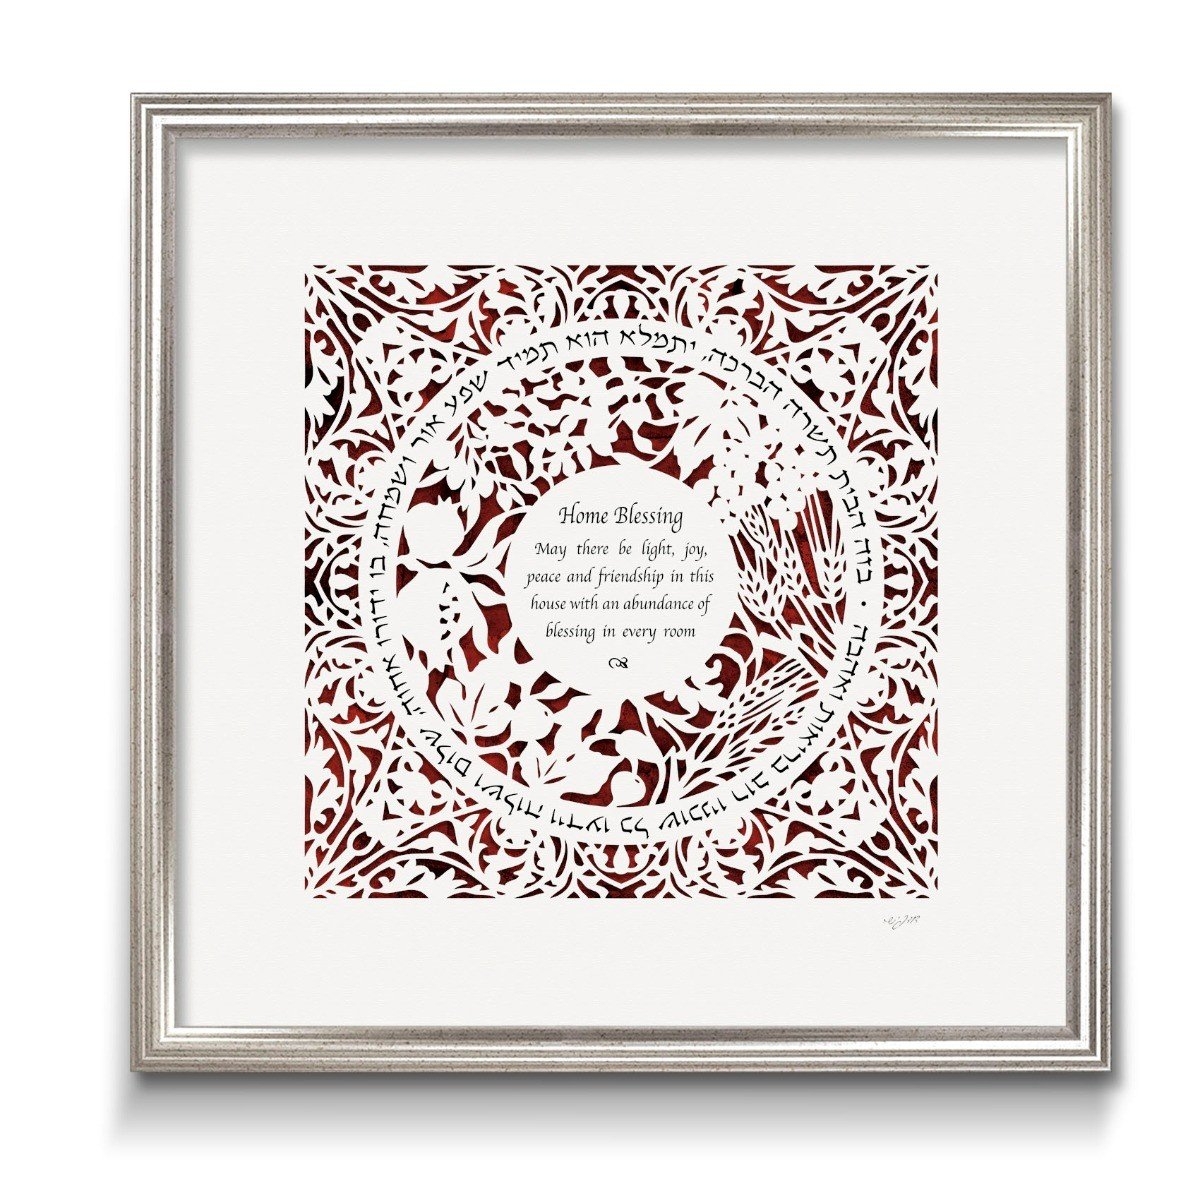 David Fisher Laser Cut Paper English/Hebrew Home Blessing With Seven Species Design (Choice of Colors) - 1